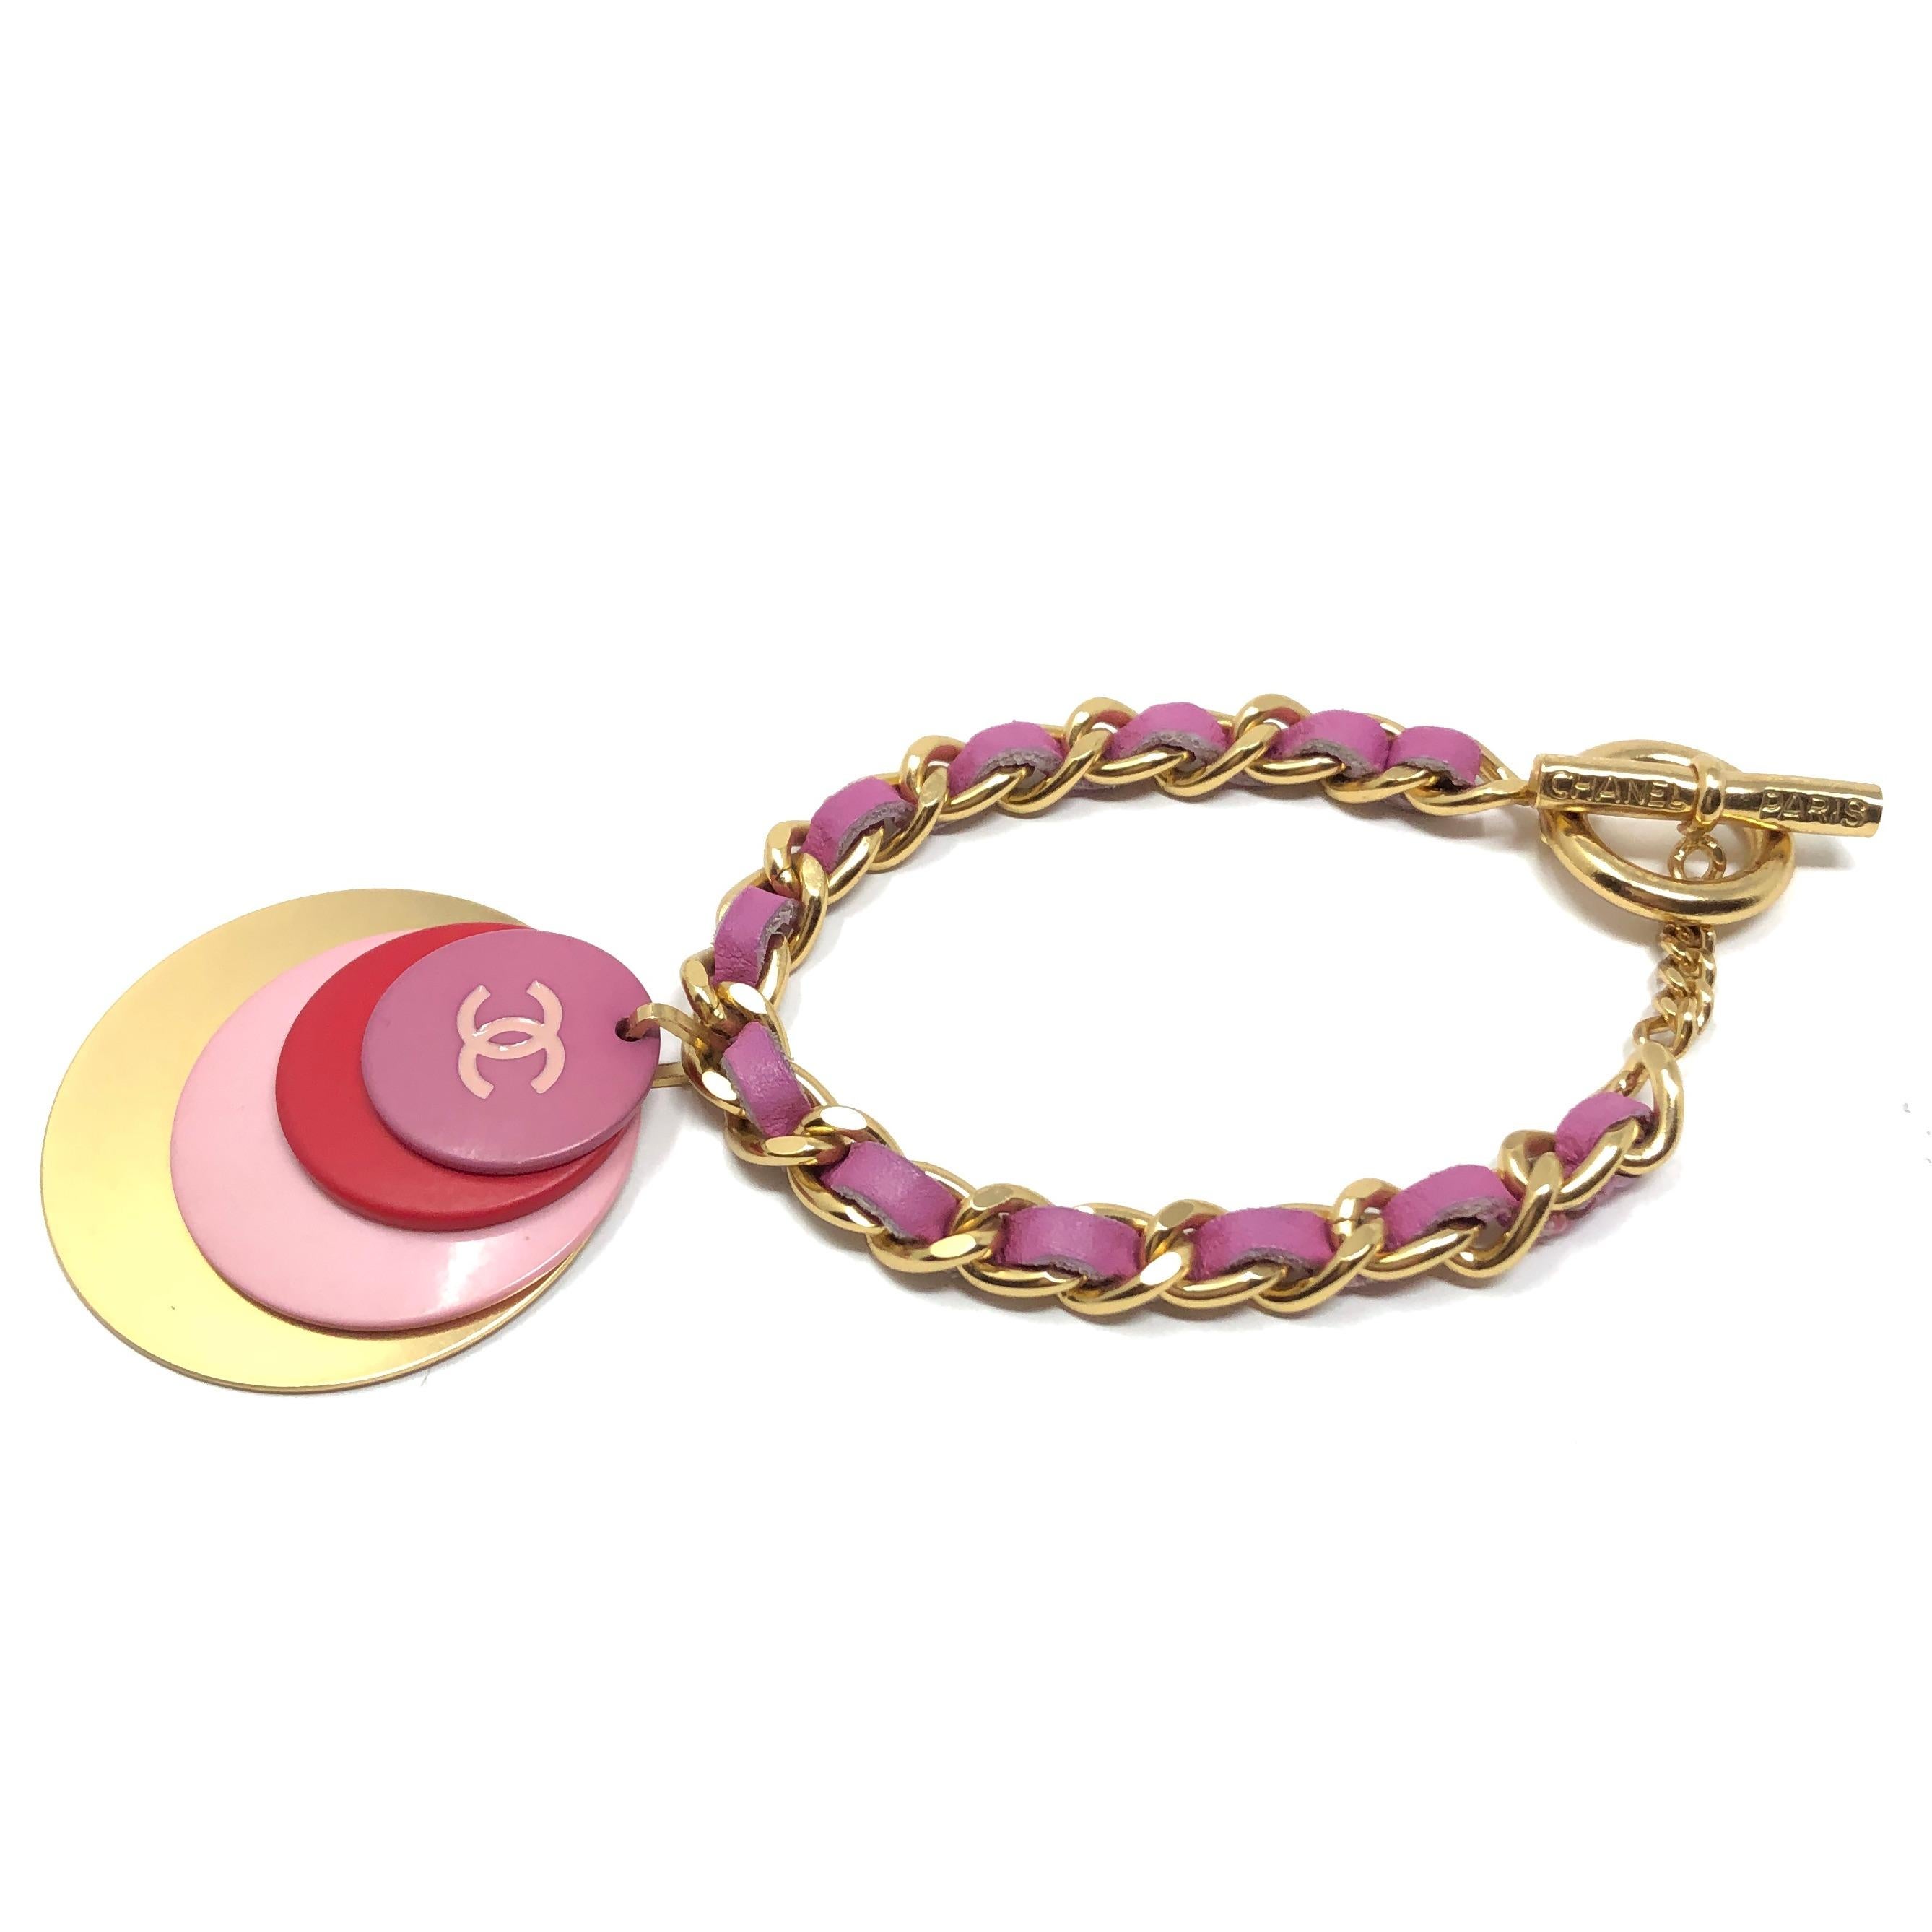 Chanel Autumn/Winter 2001 Gold Plated and Pink Leather Vintage Logo Bracelet In Excellent Condition For Sale In Skelmersdale, GB